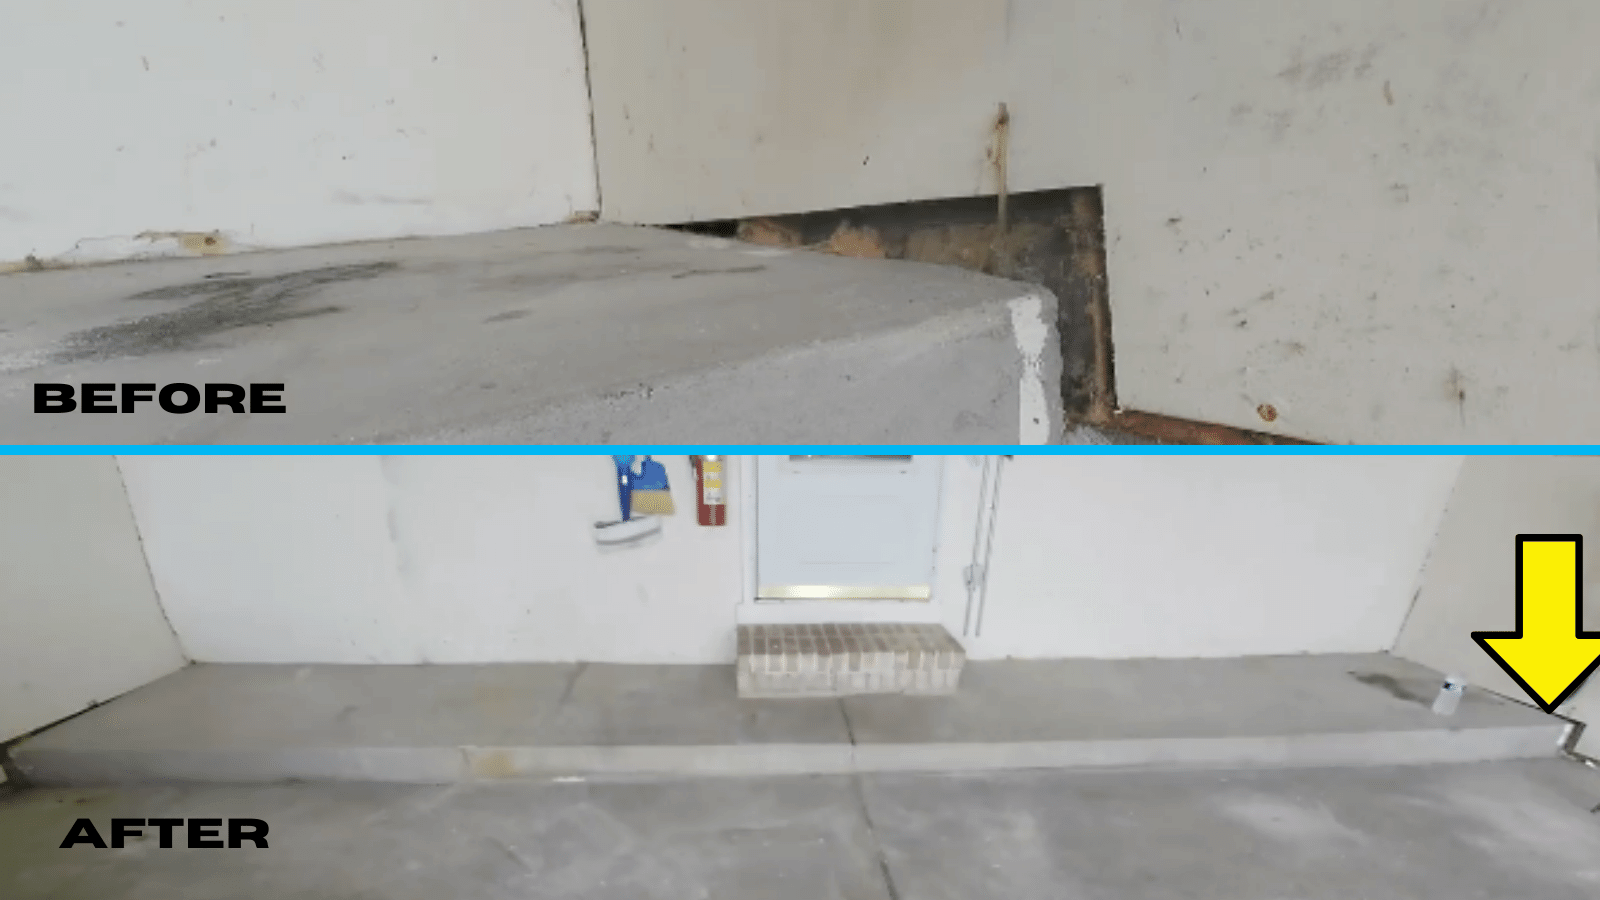 The before and after of sinking concrete lifting